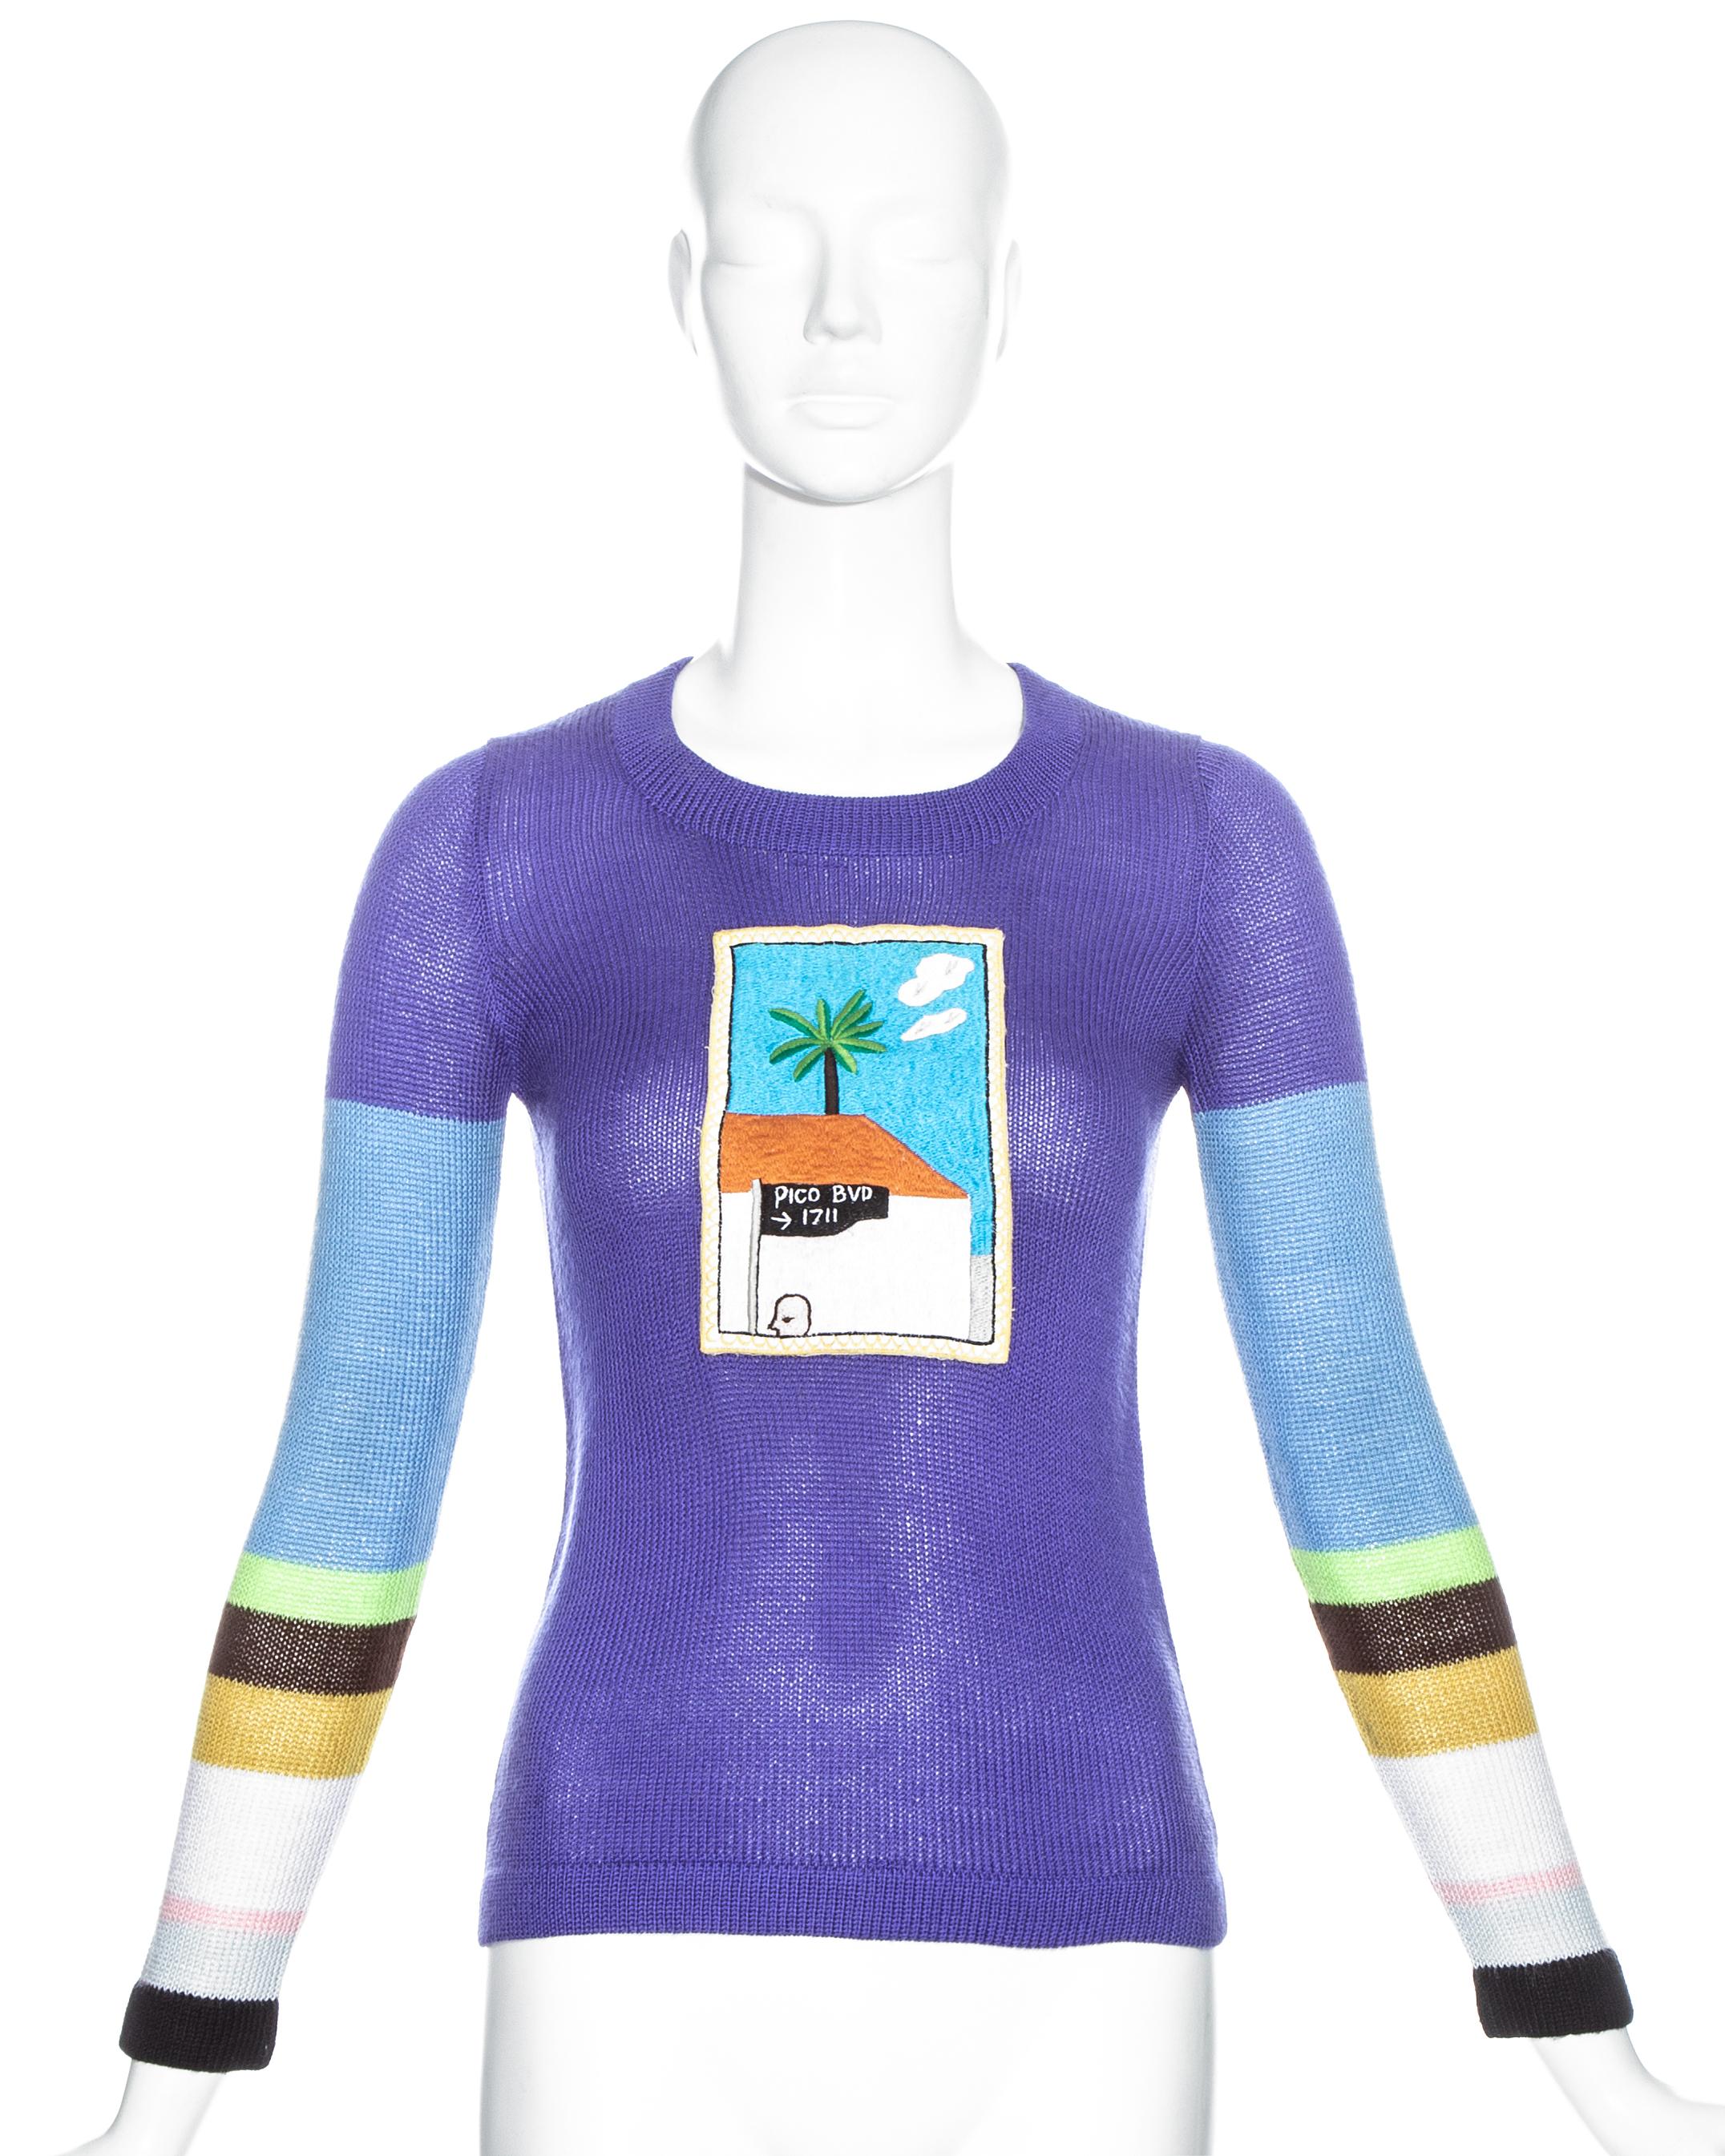 David Hockney multicoloured acrylic knit sweater from The Artist Collection by the Ritva Man. Embroidered appliqué, limited edition (124/150).

The Artist Collection was a collaboration with artists Elizabeth Frink, David Hockney, Patrick Hughes and